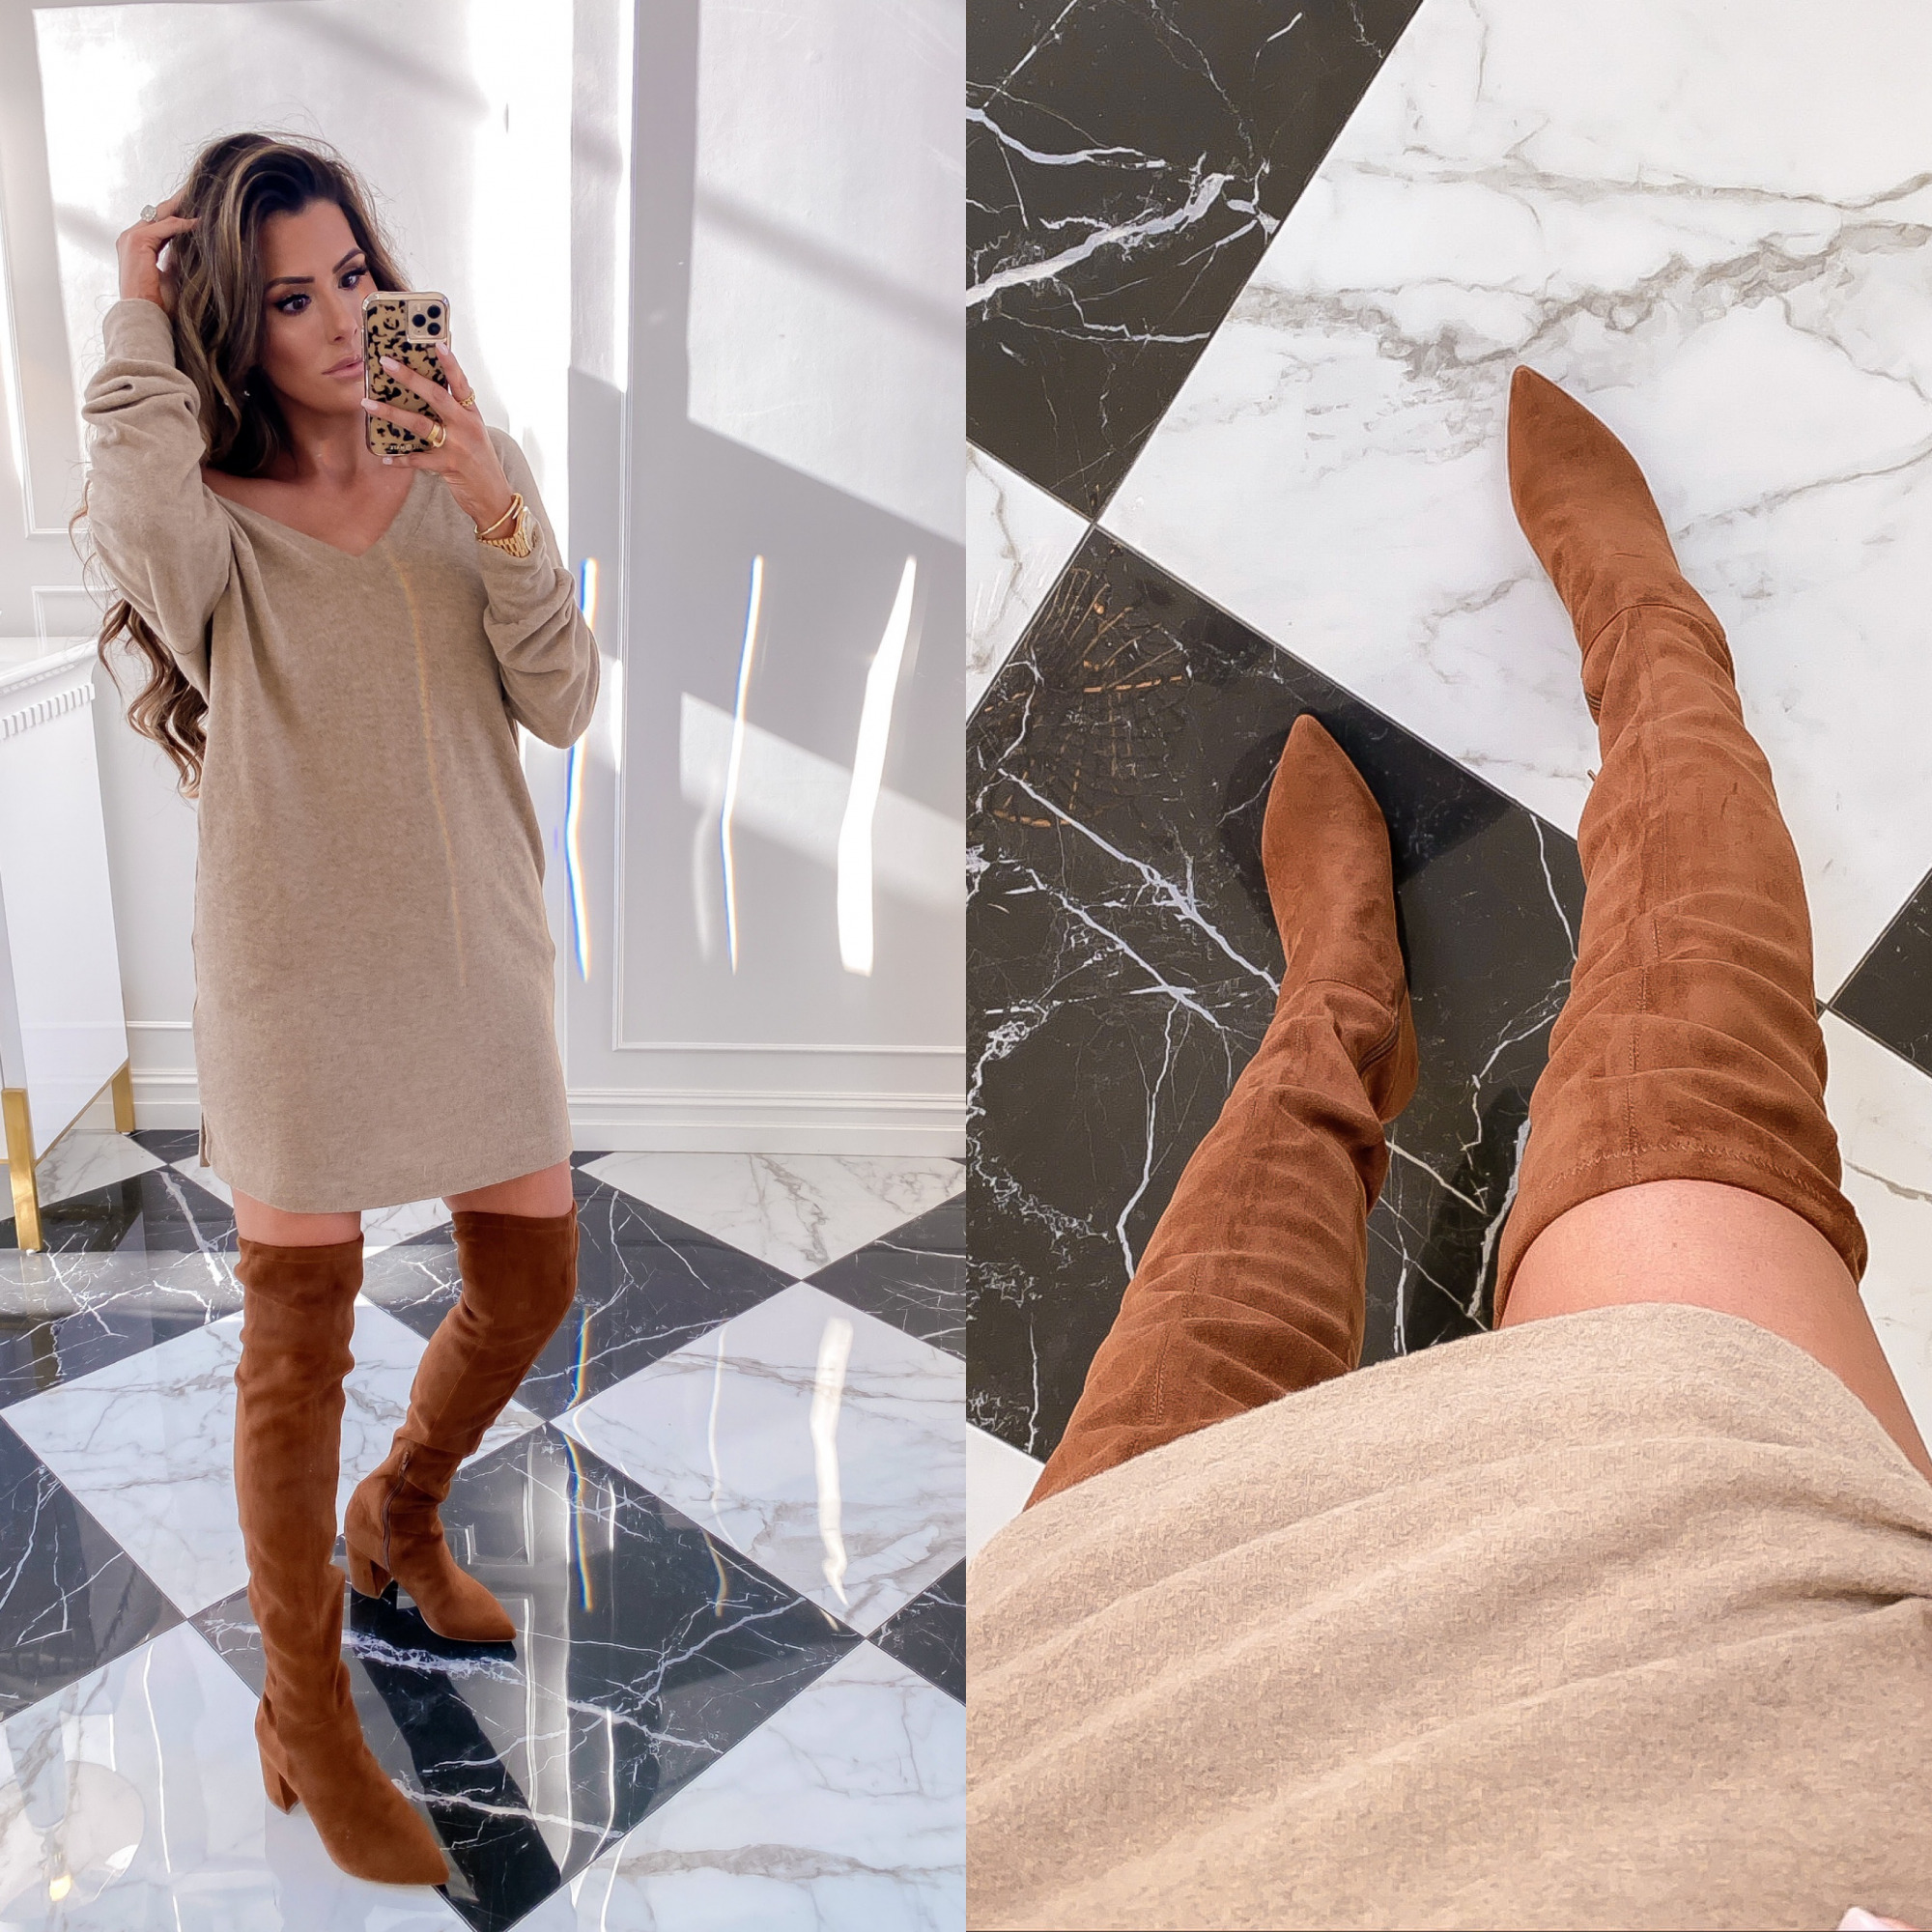 Nordstrom Anniversary Sale 2021 try on blog, NSALE 2021 boots dresses fall, Emily gemma | Nordstrom Anniversary Sale by popular US fashion blog, The Sweetest Thing: collage image of Emily Gemma wearing a tan sweater dress and brown suede over the knee boots. 